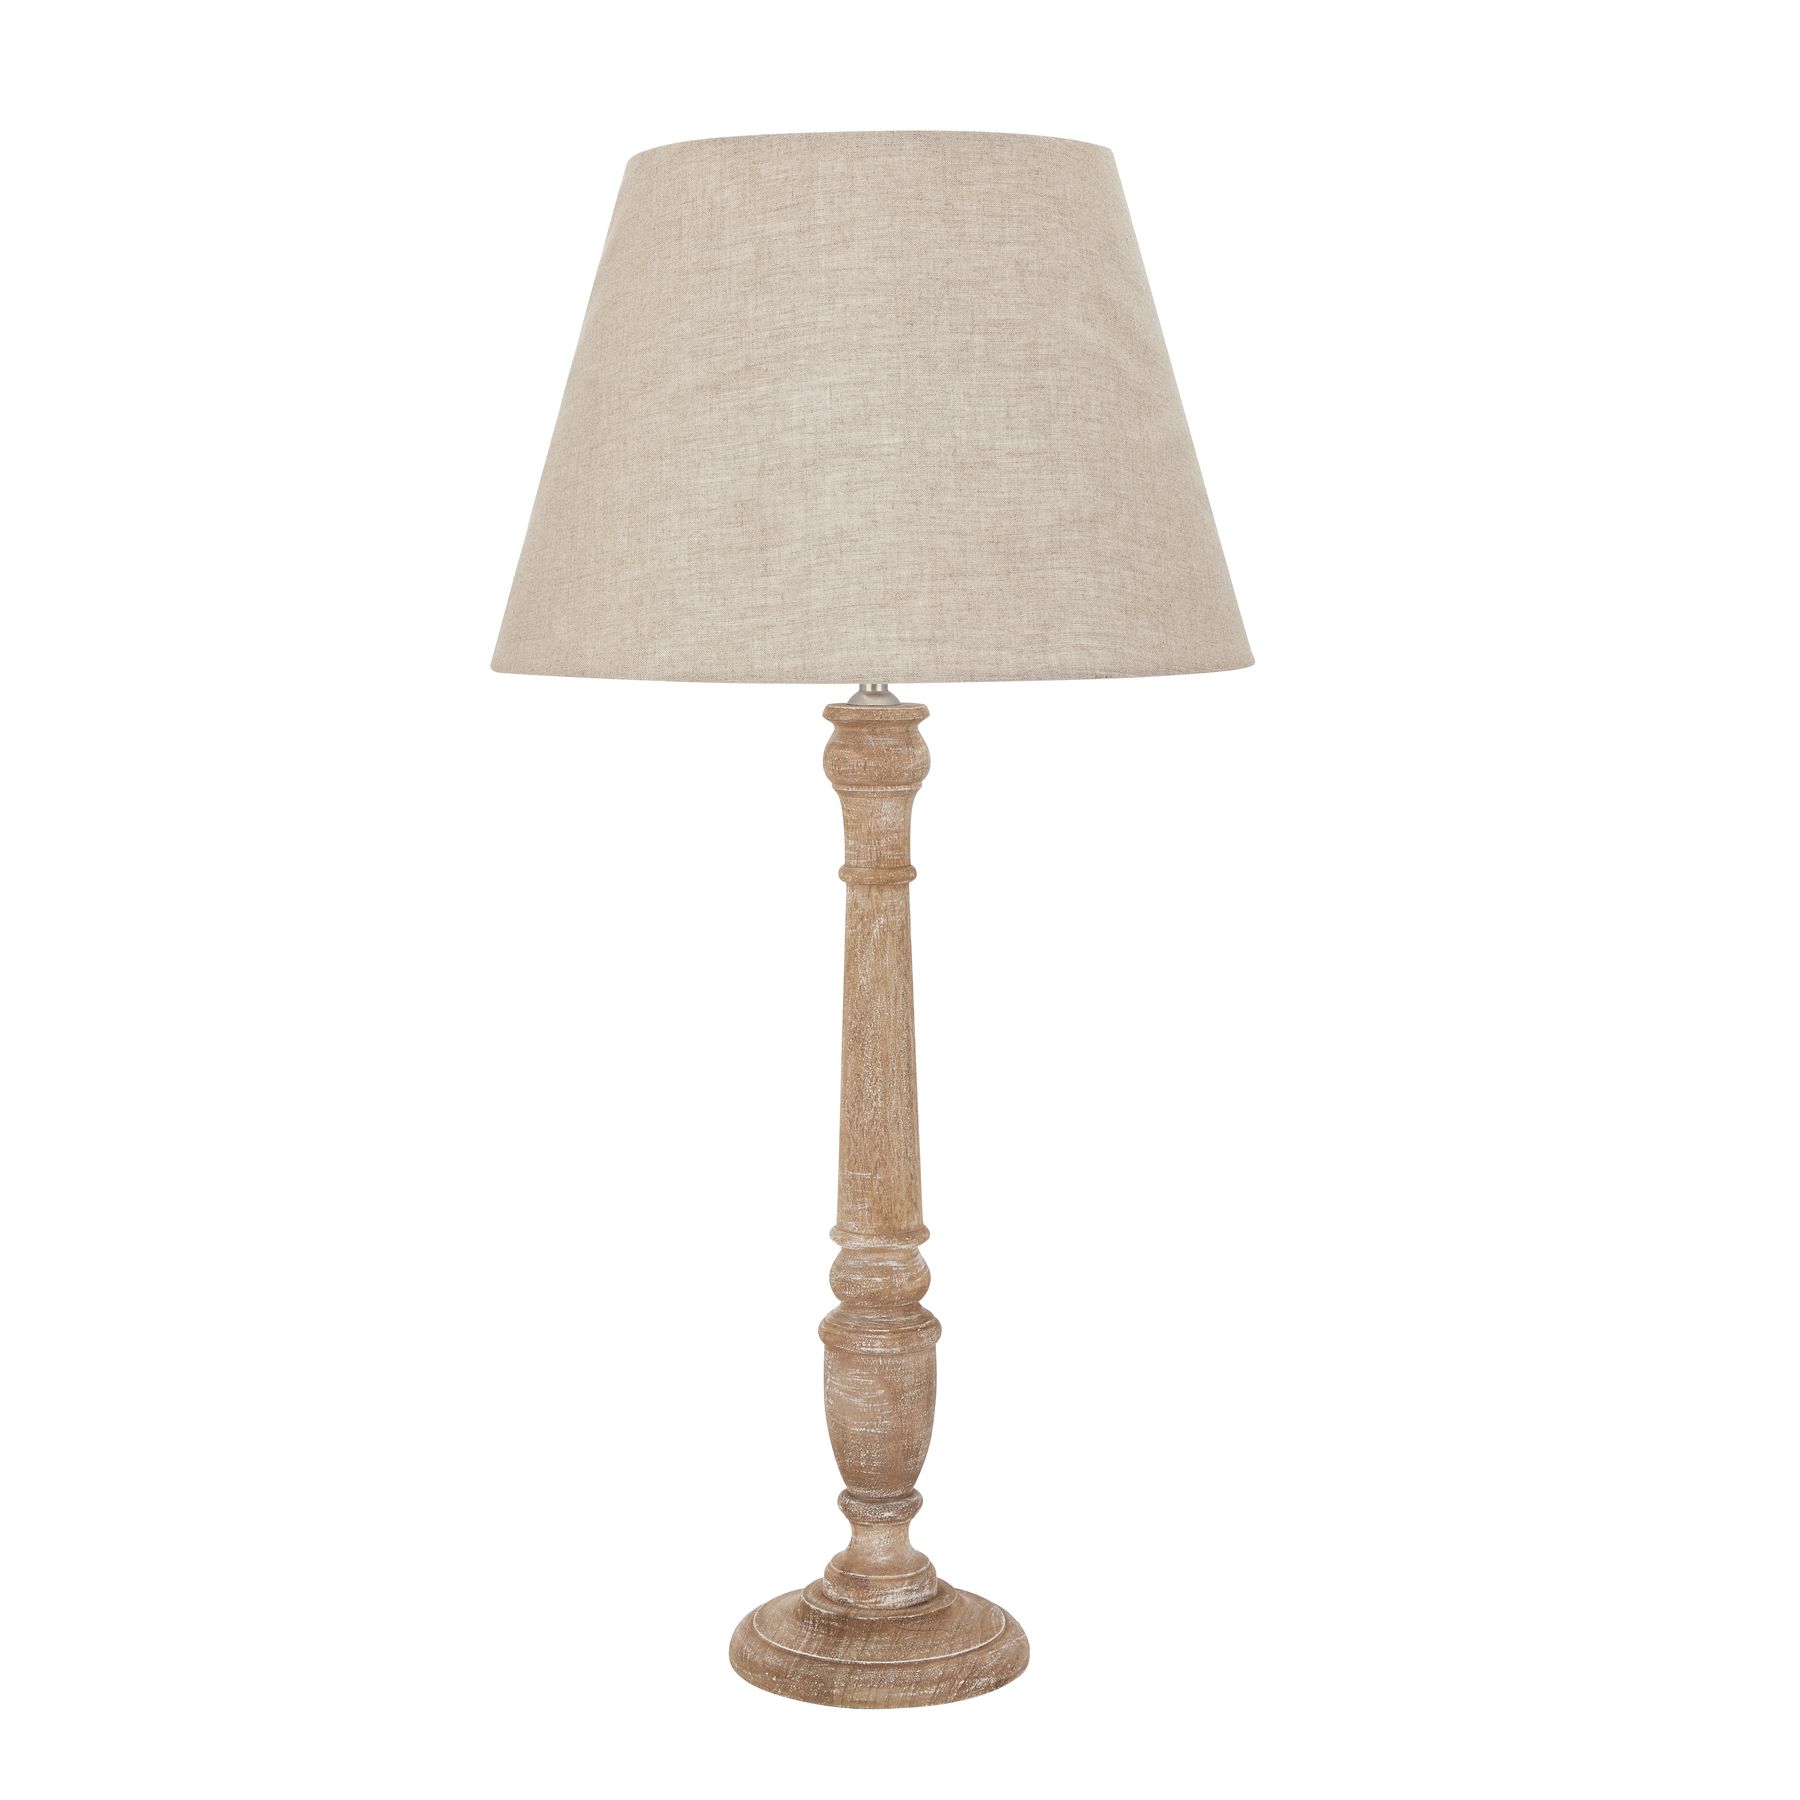 Delaney Natural Wash Spindle Lamp With Linen Shade - Image 1